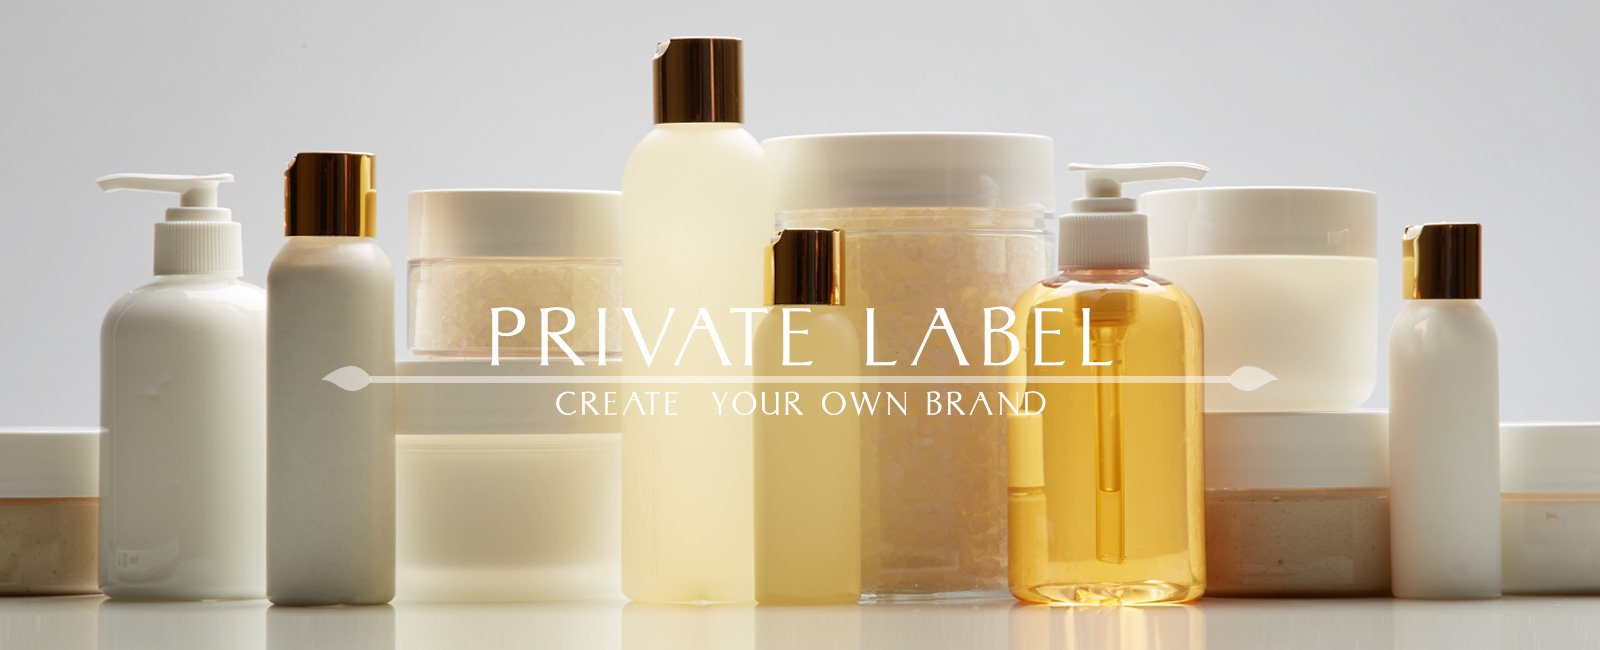 Cosmetic is one of the most popular industries using private label model